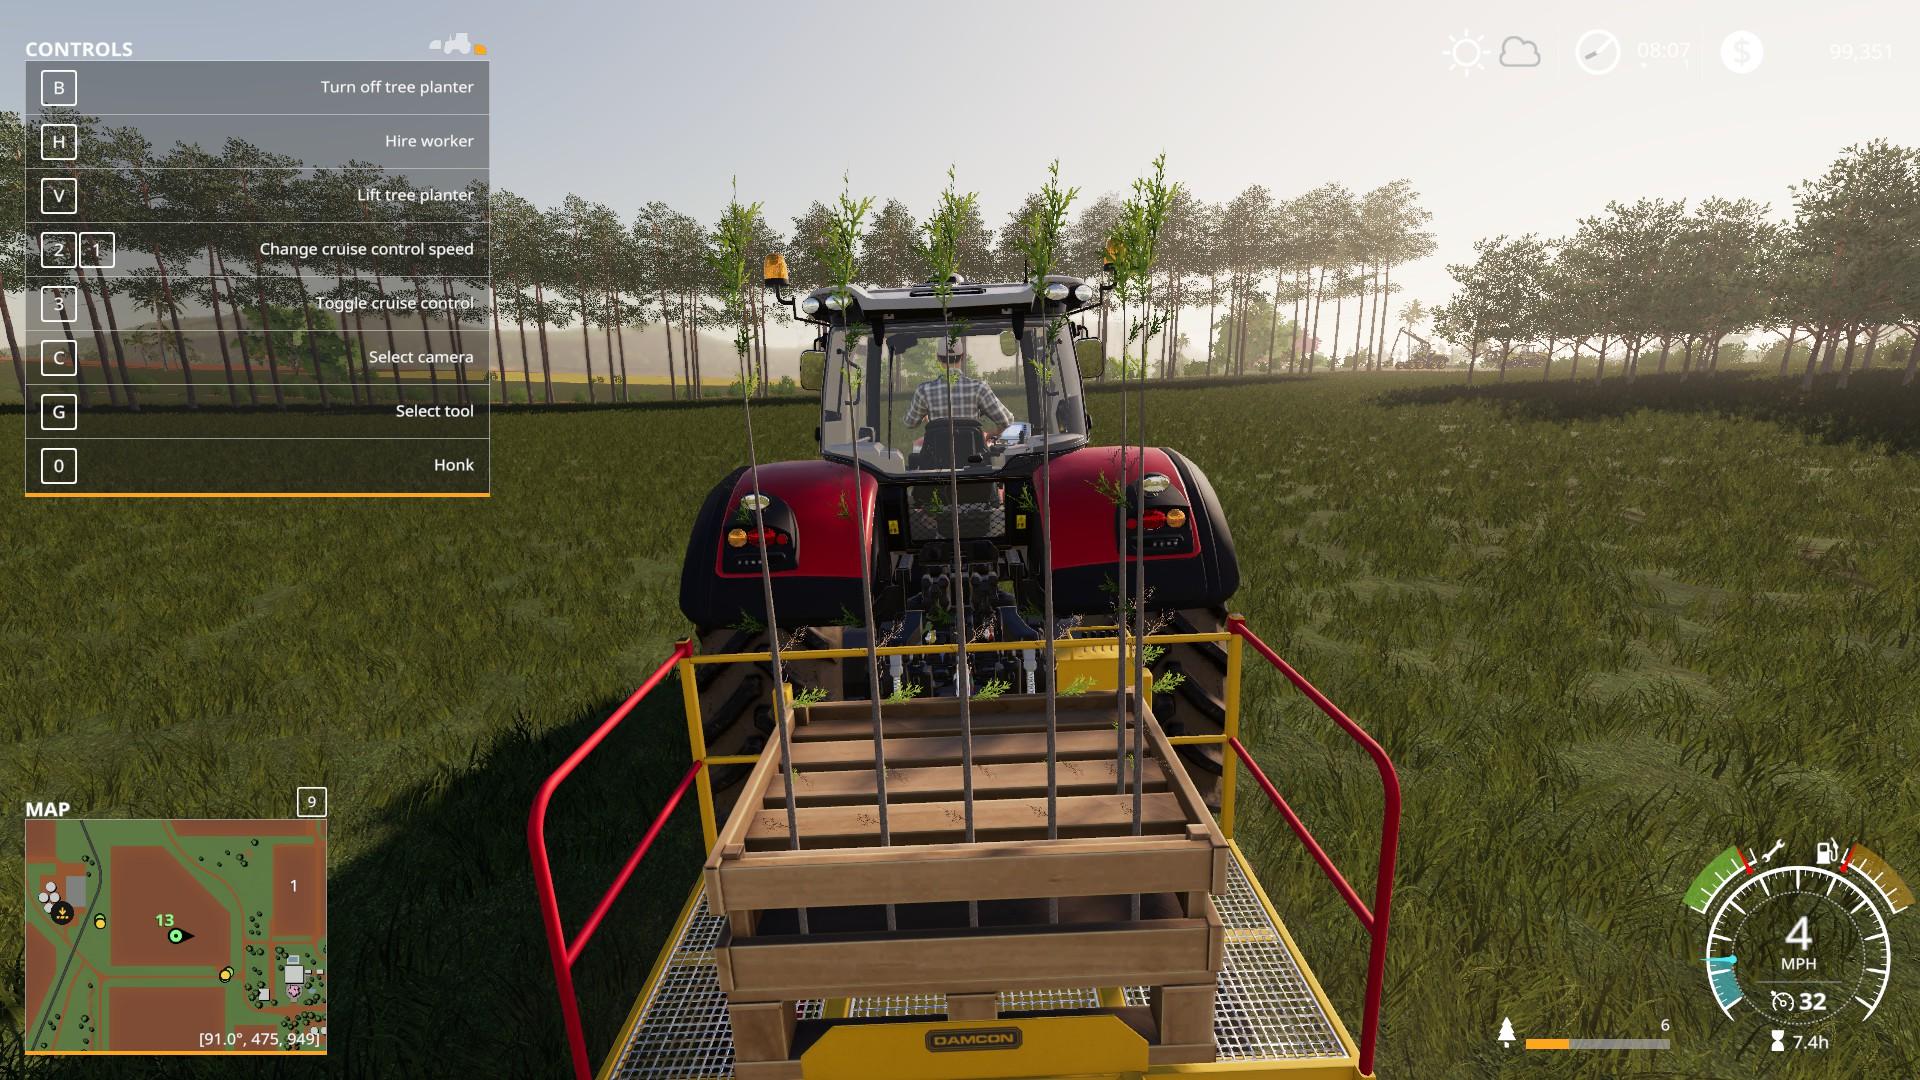 Farming Simulator 19 Tree Growth Stages From Start To Finish - roblox egg farm simulator script